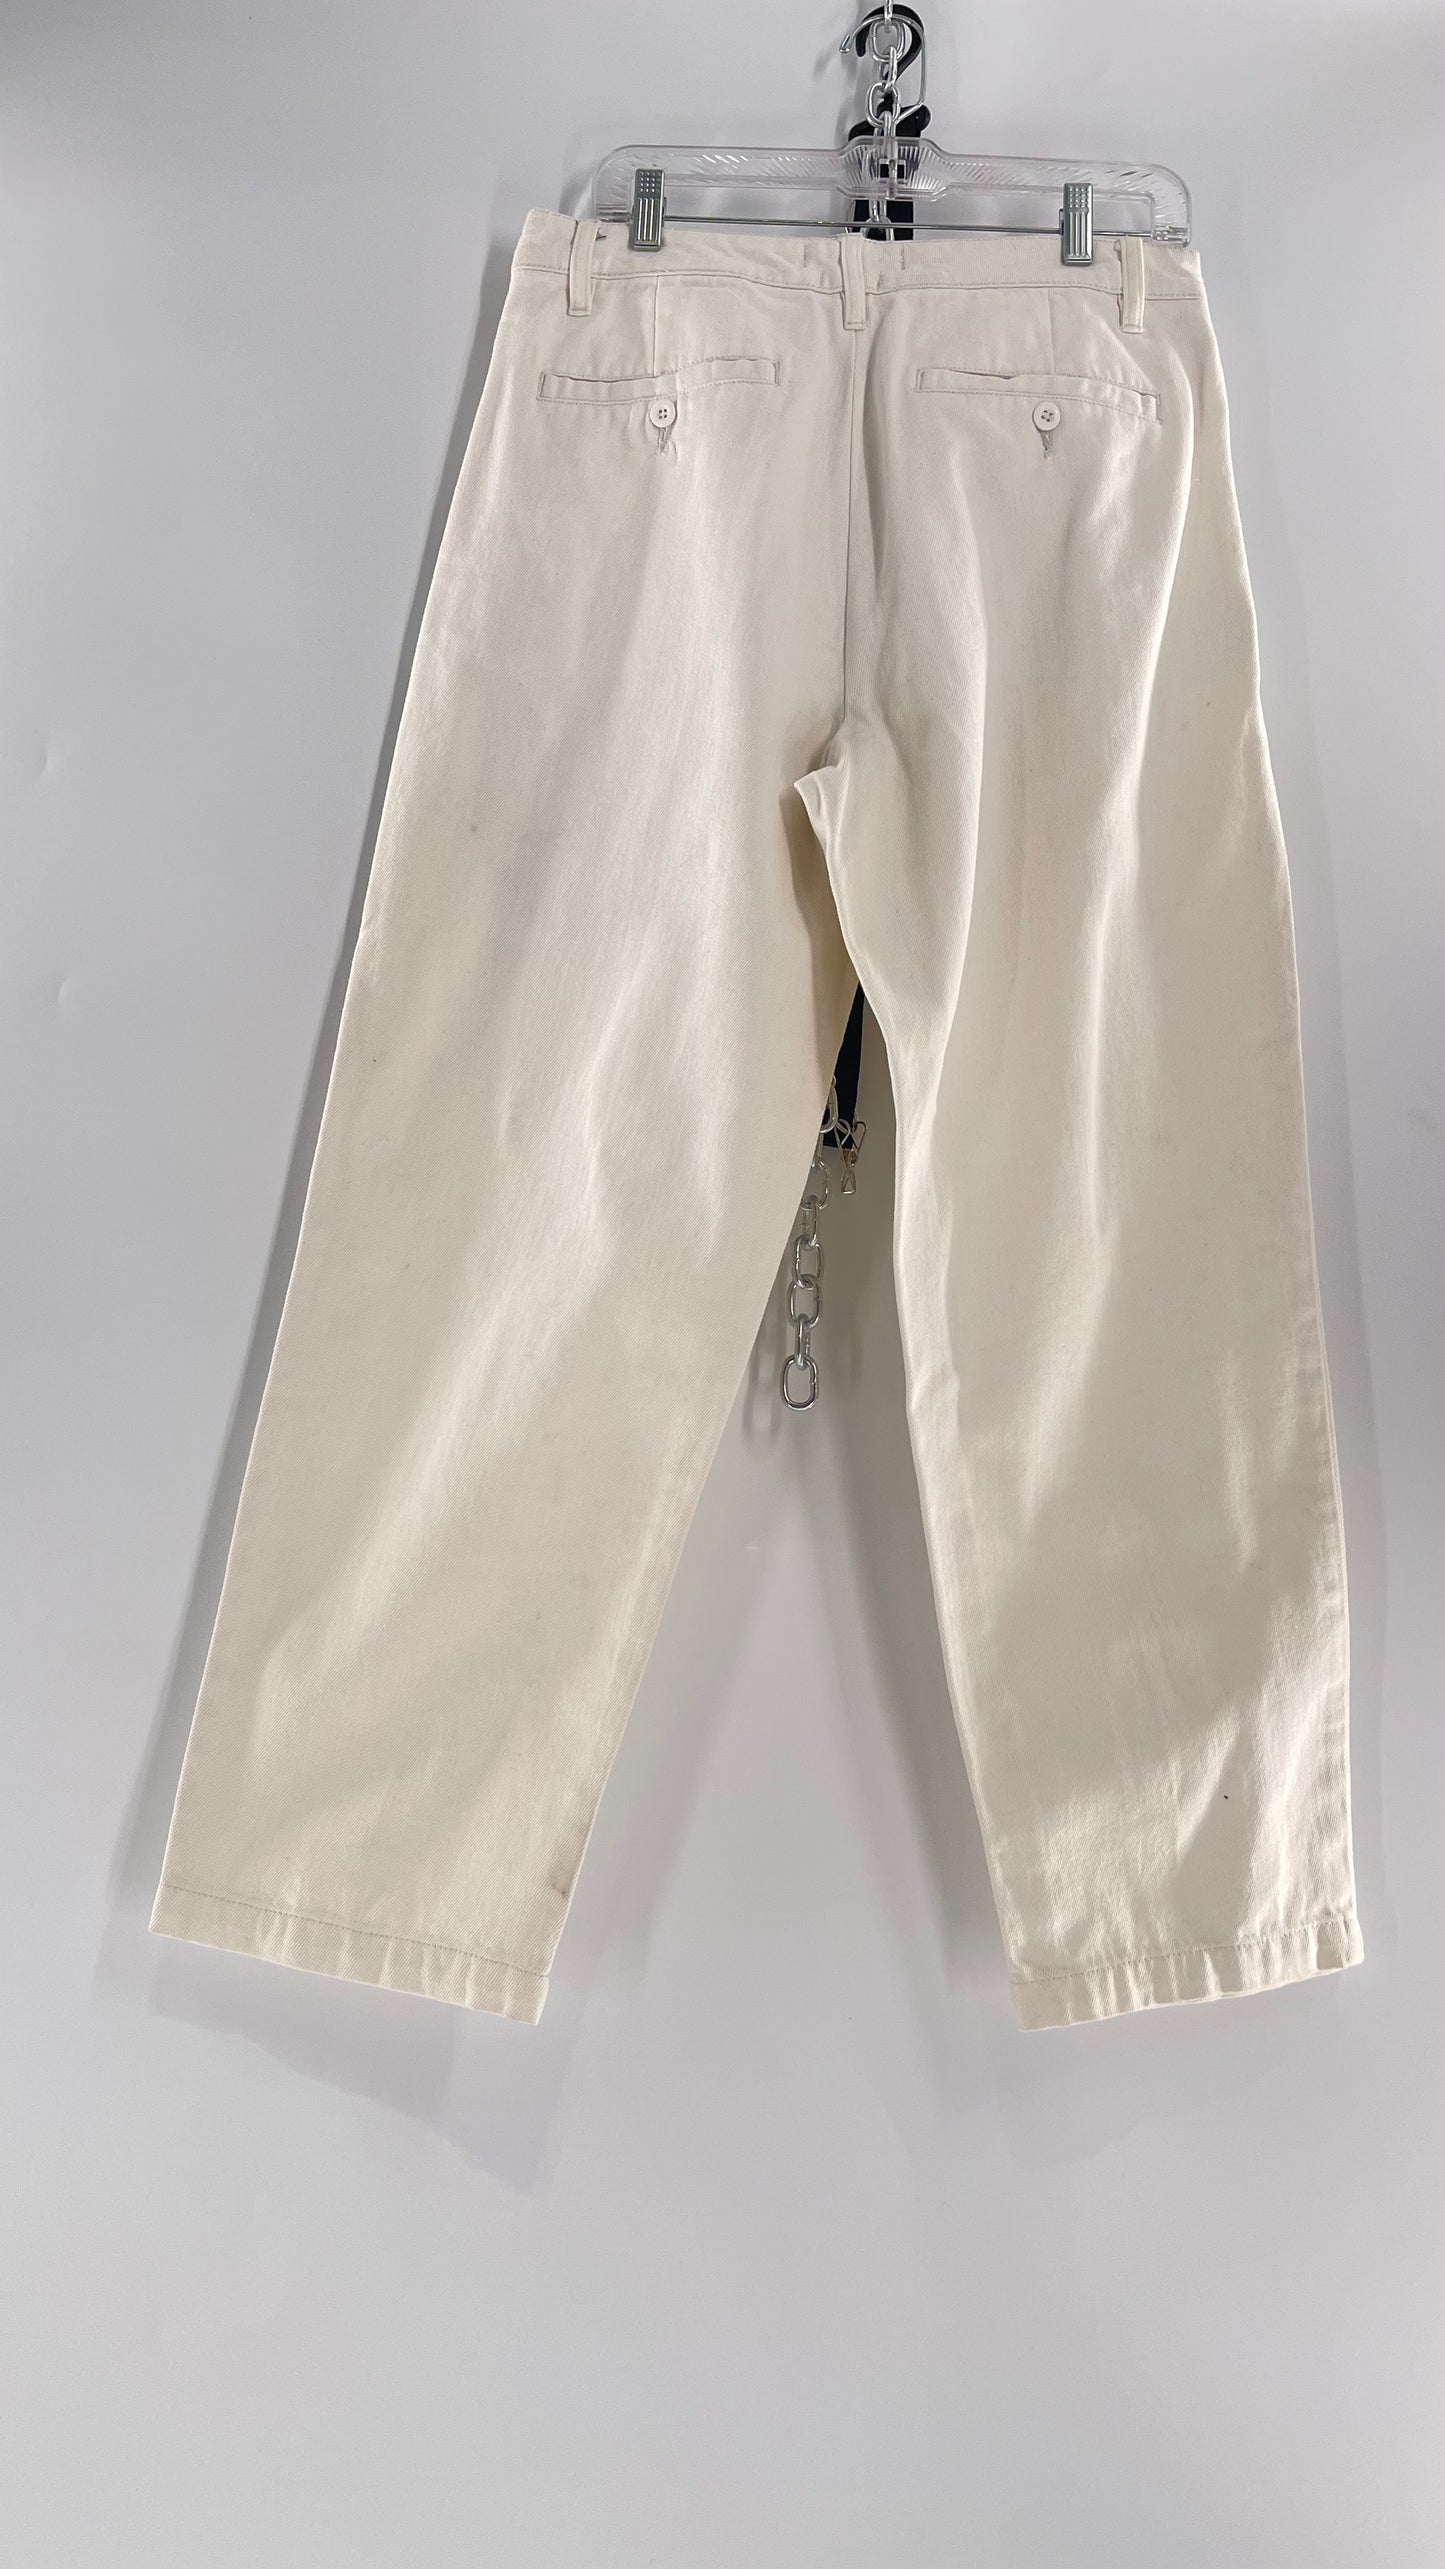 Urban Outfitters White Carpenter Pant with Globe Peace Sign Graphic (32)